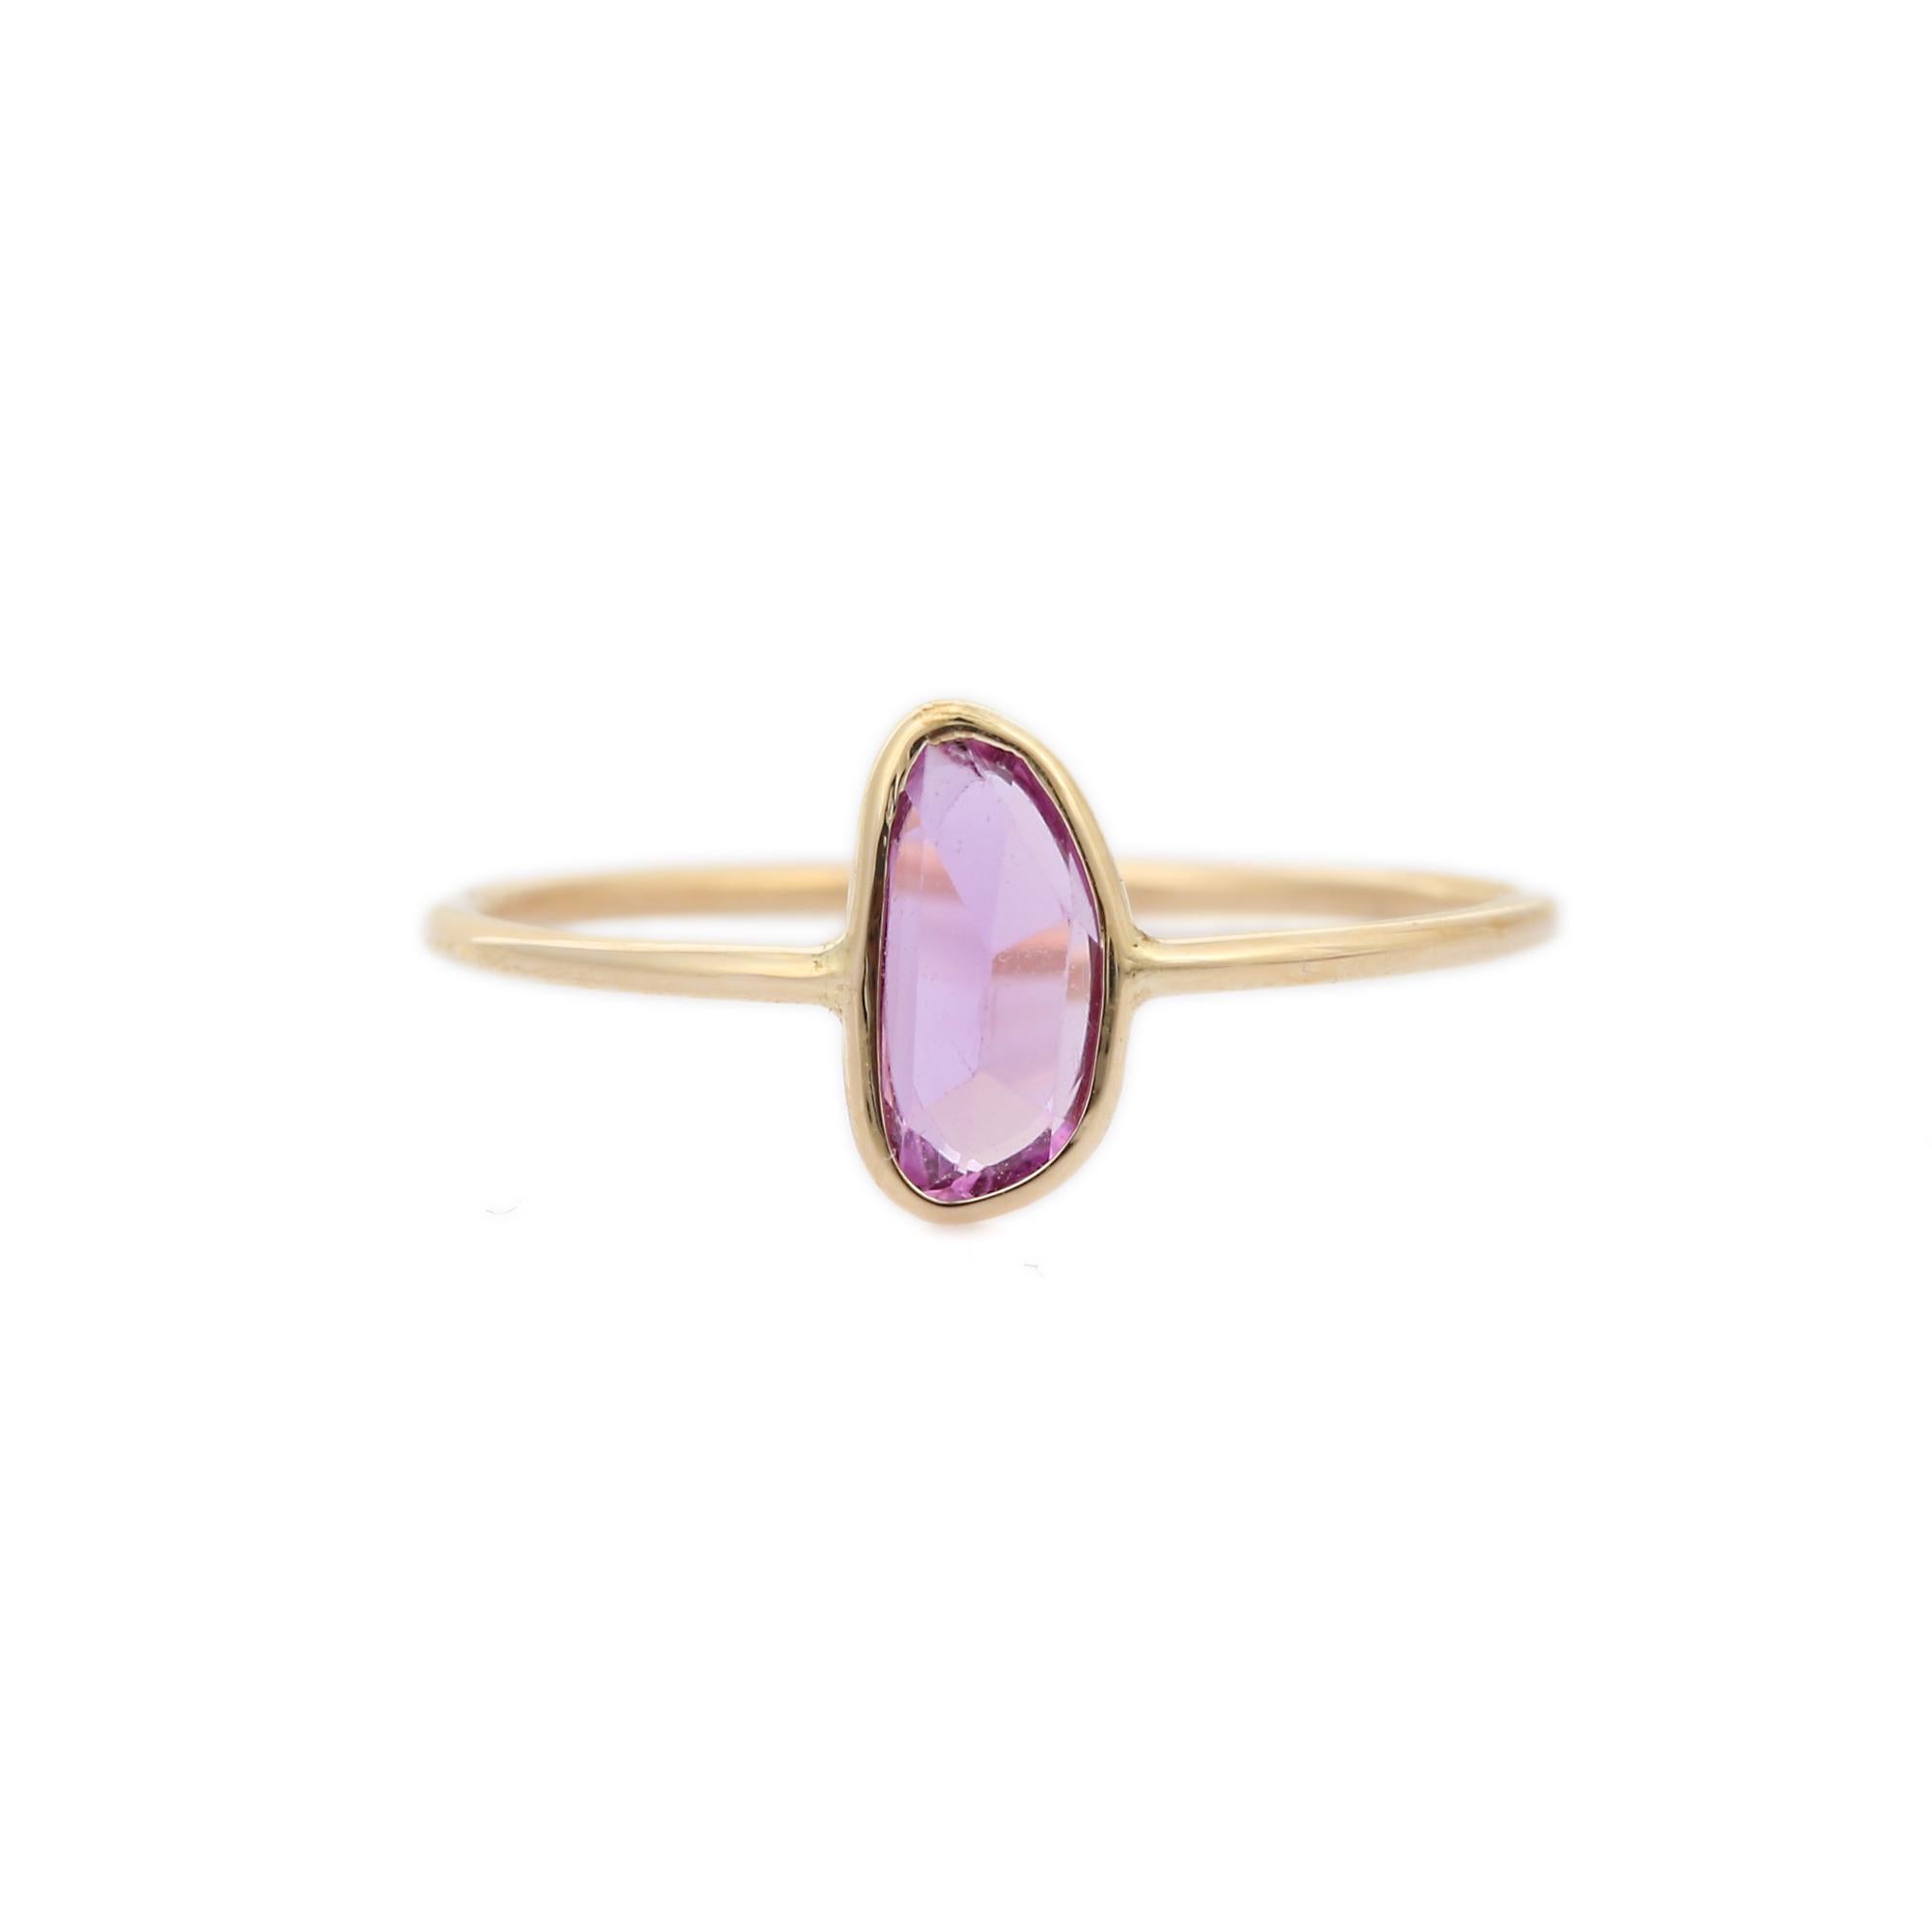 For Sale:  Handcrafted Pink Sapphire Gemstone Single Stone Ring in 14 Karat Yellow Gold 2